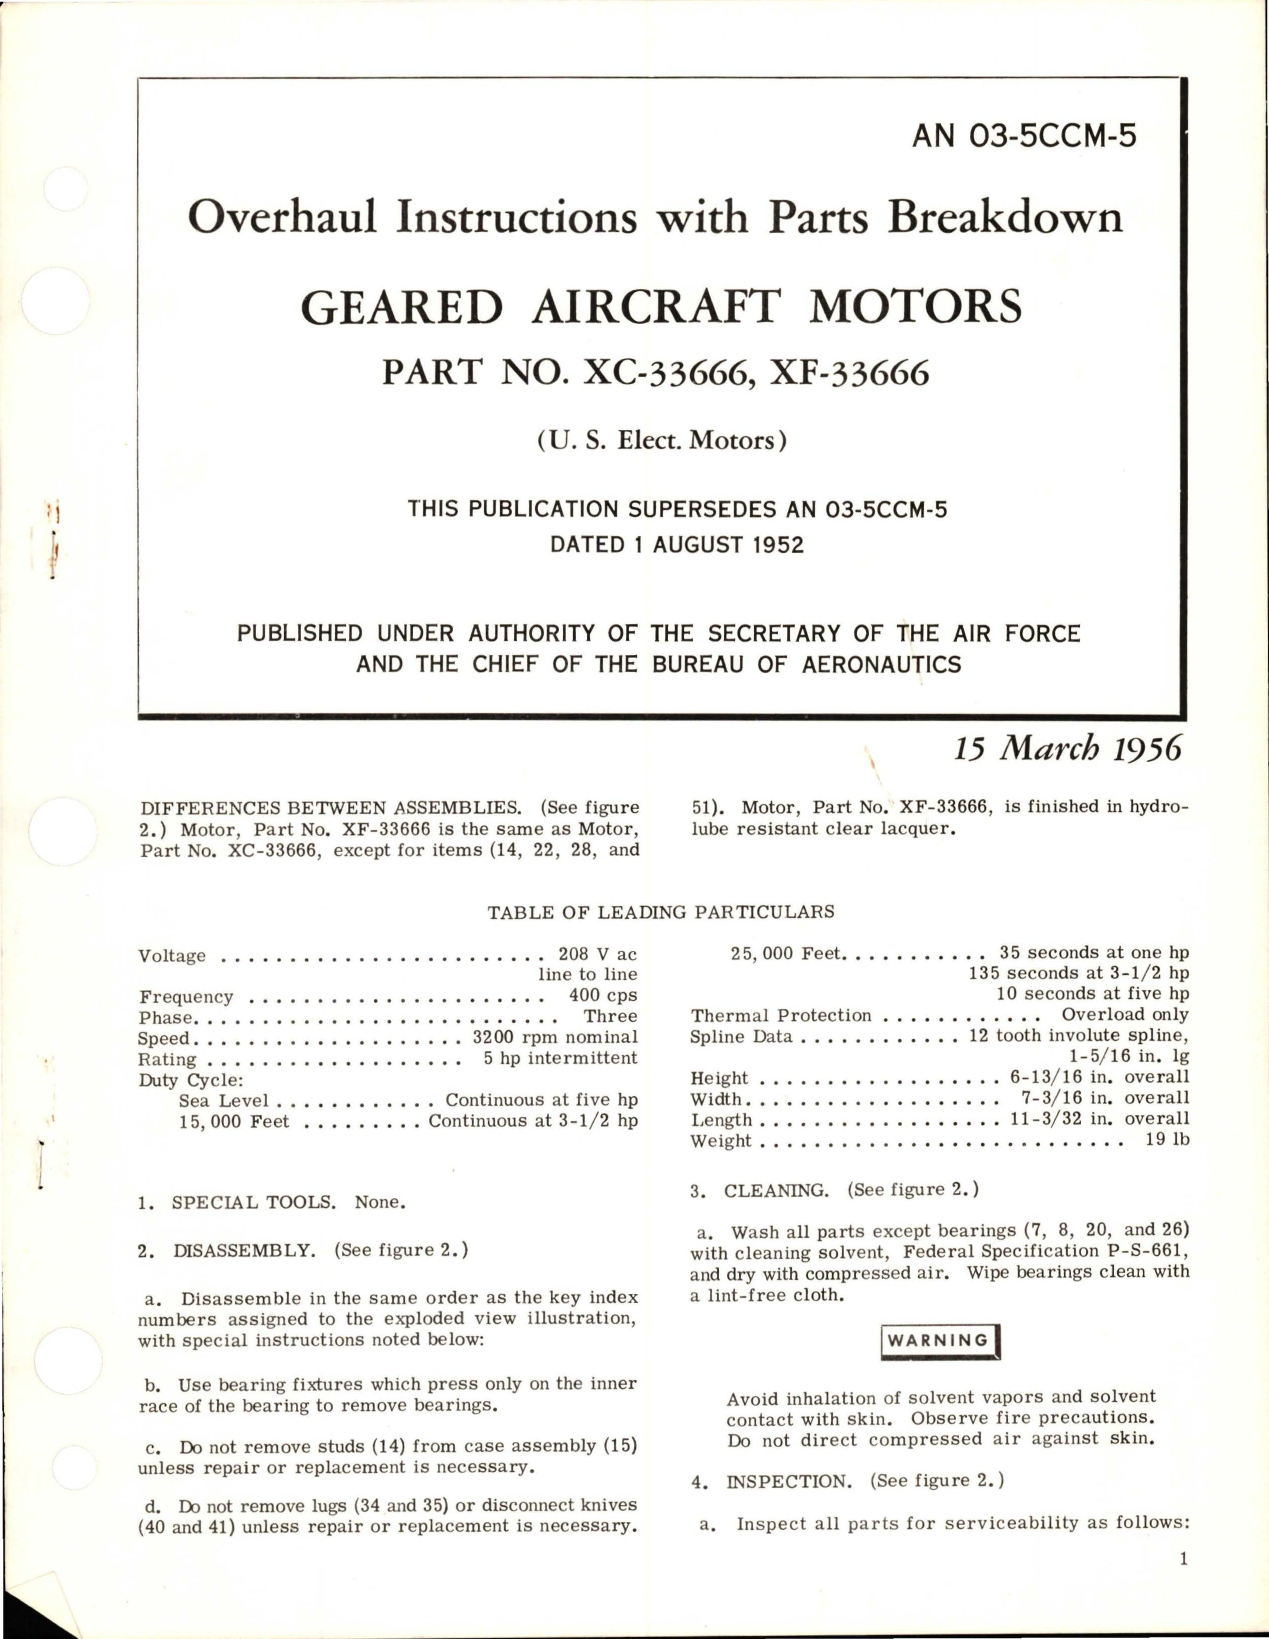 Sample page 1 from AirCorps Library document: Overhaul Instructions with Parts Breakdown for Geared Aircraft Motors - Parts XC-33666 and XF-33666